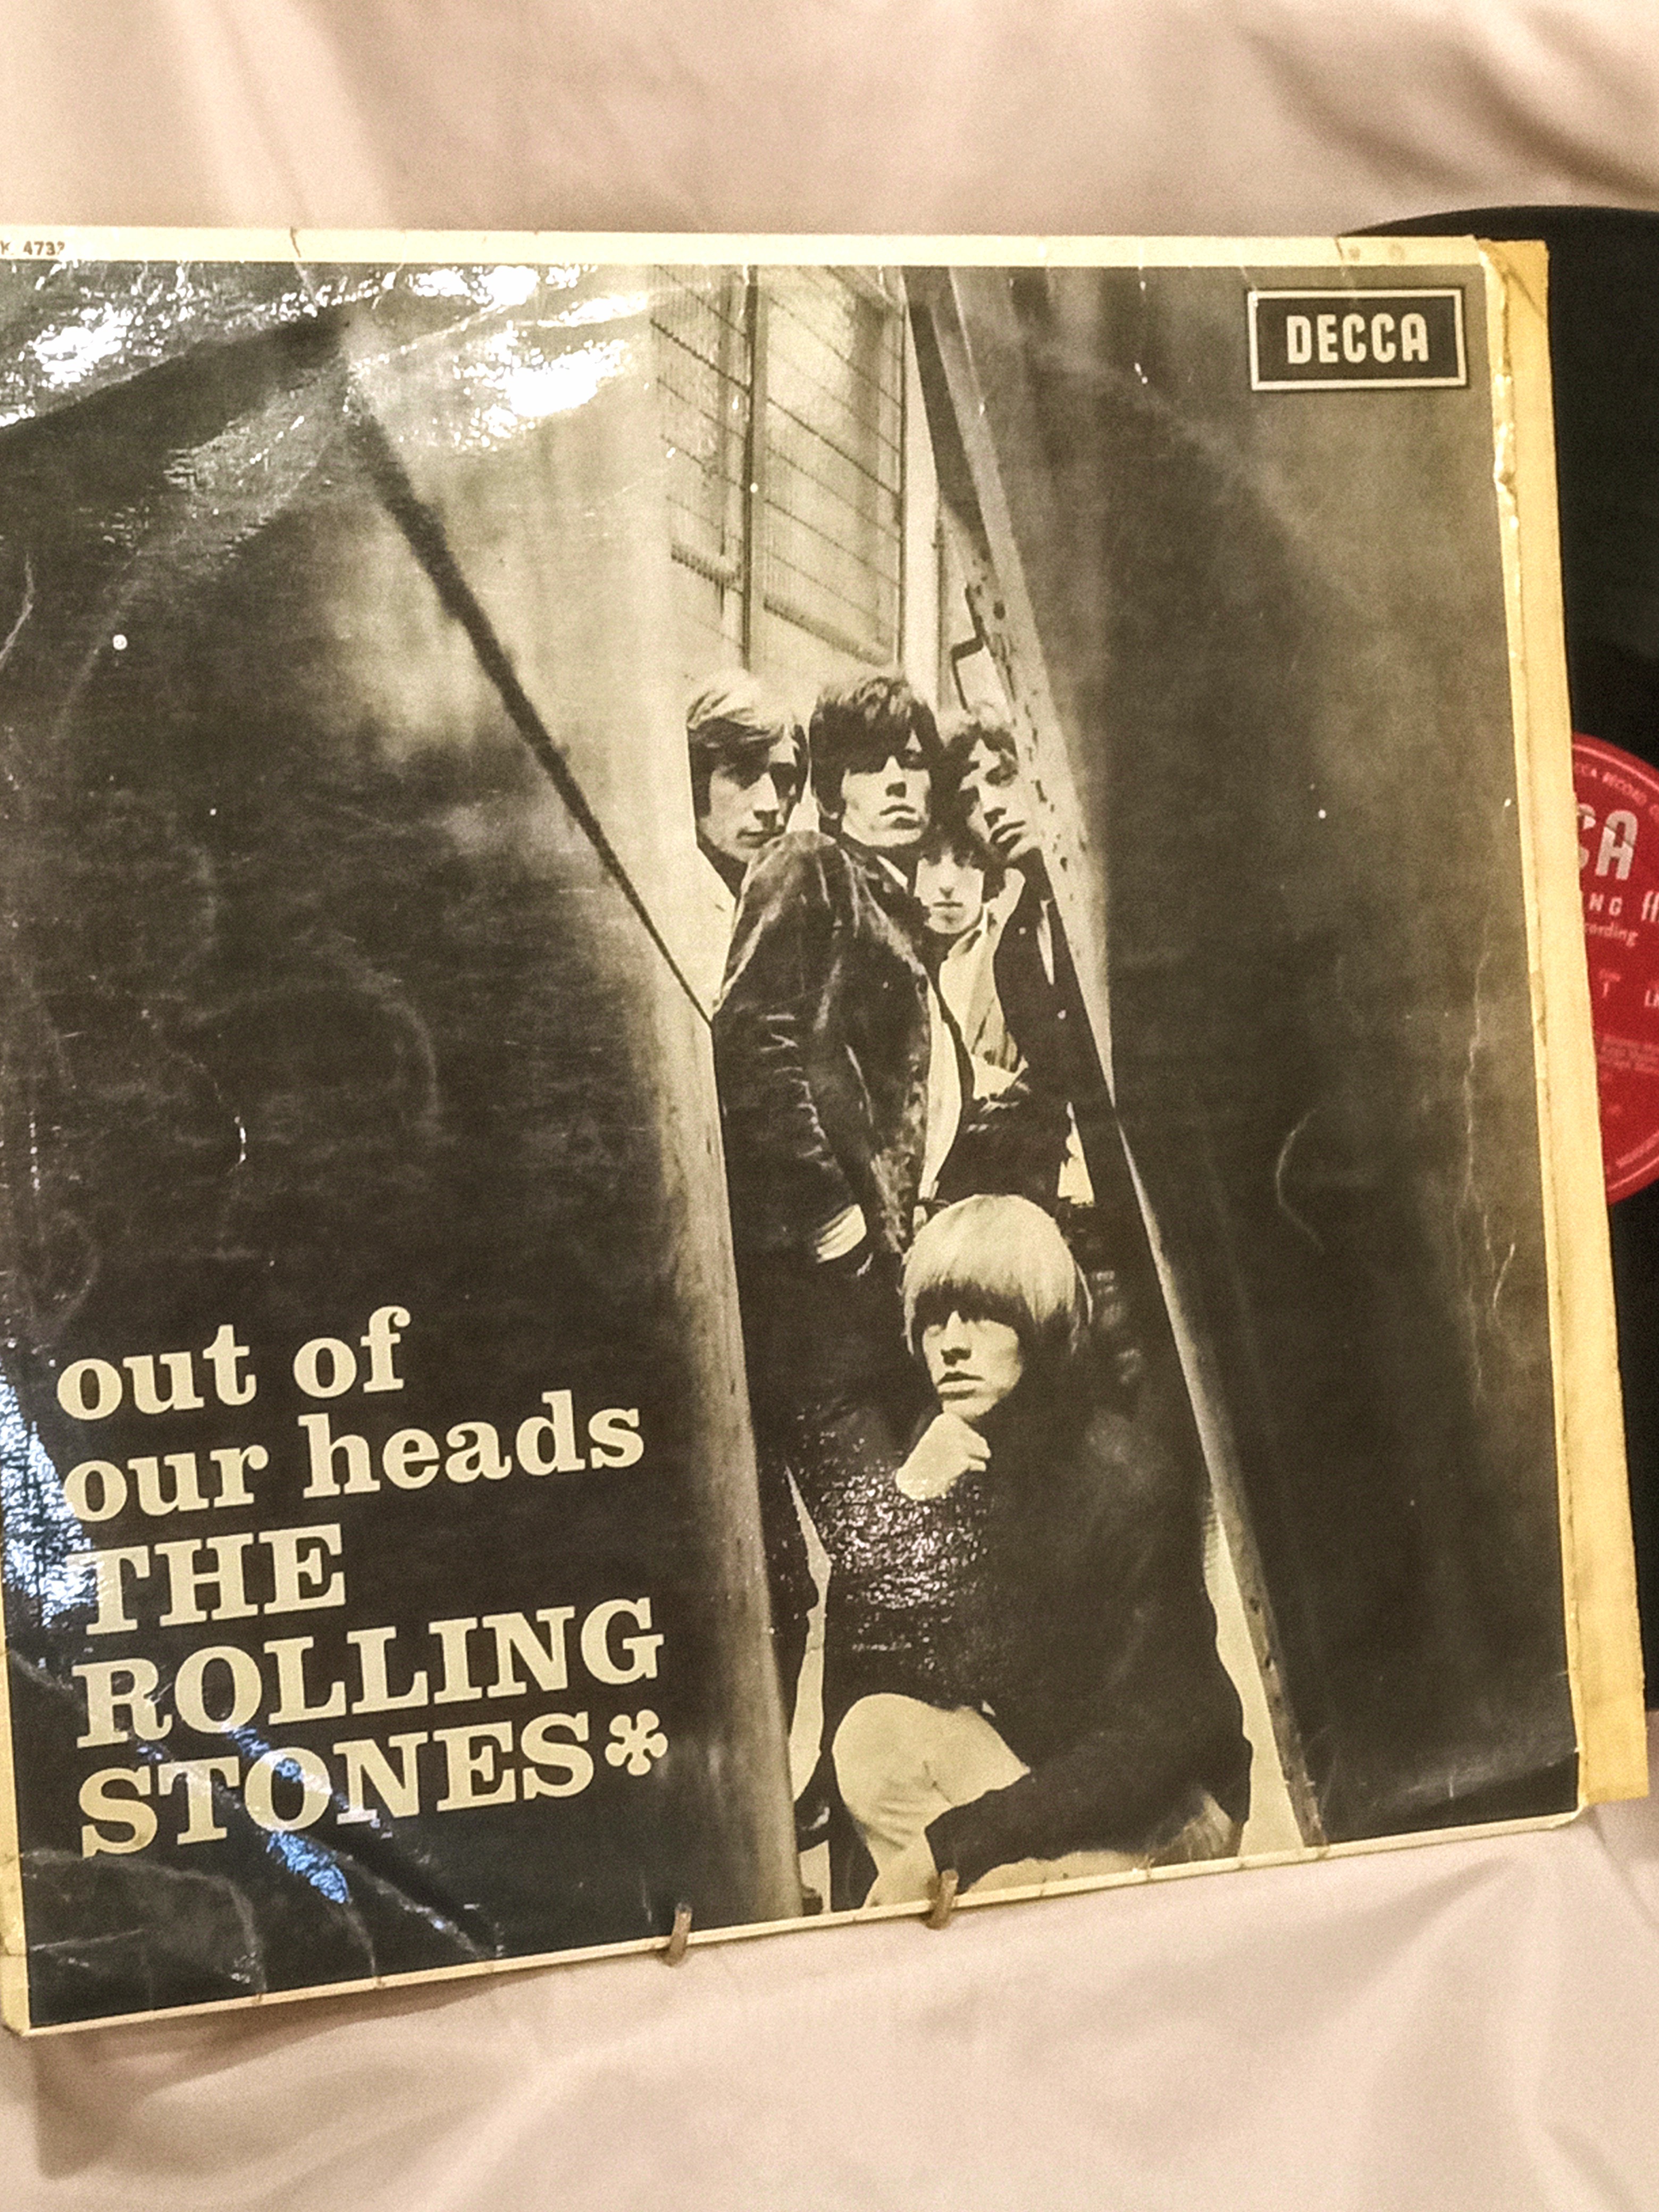 Out of Our Heads Rolling Stones Vinyl Album